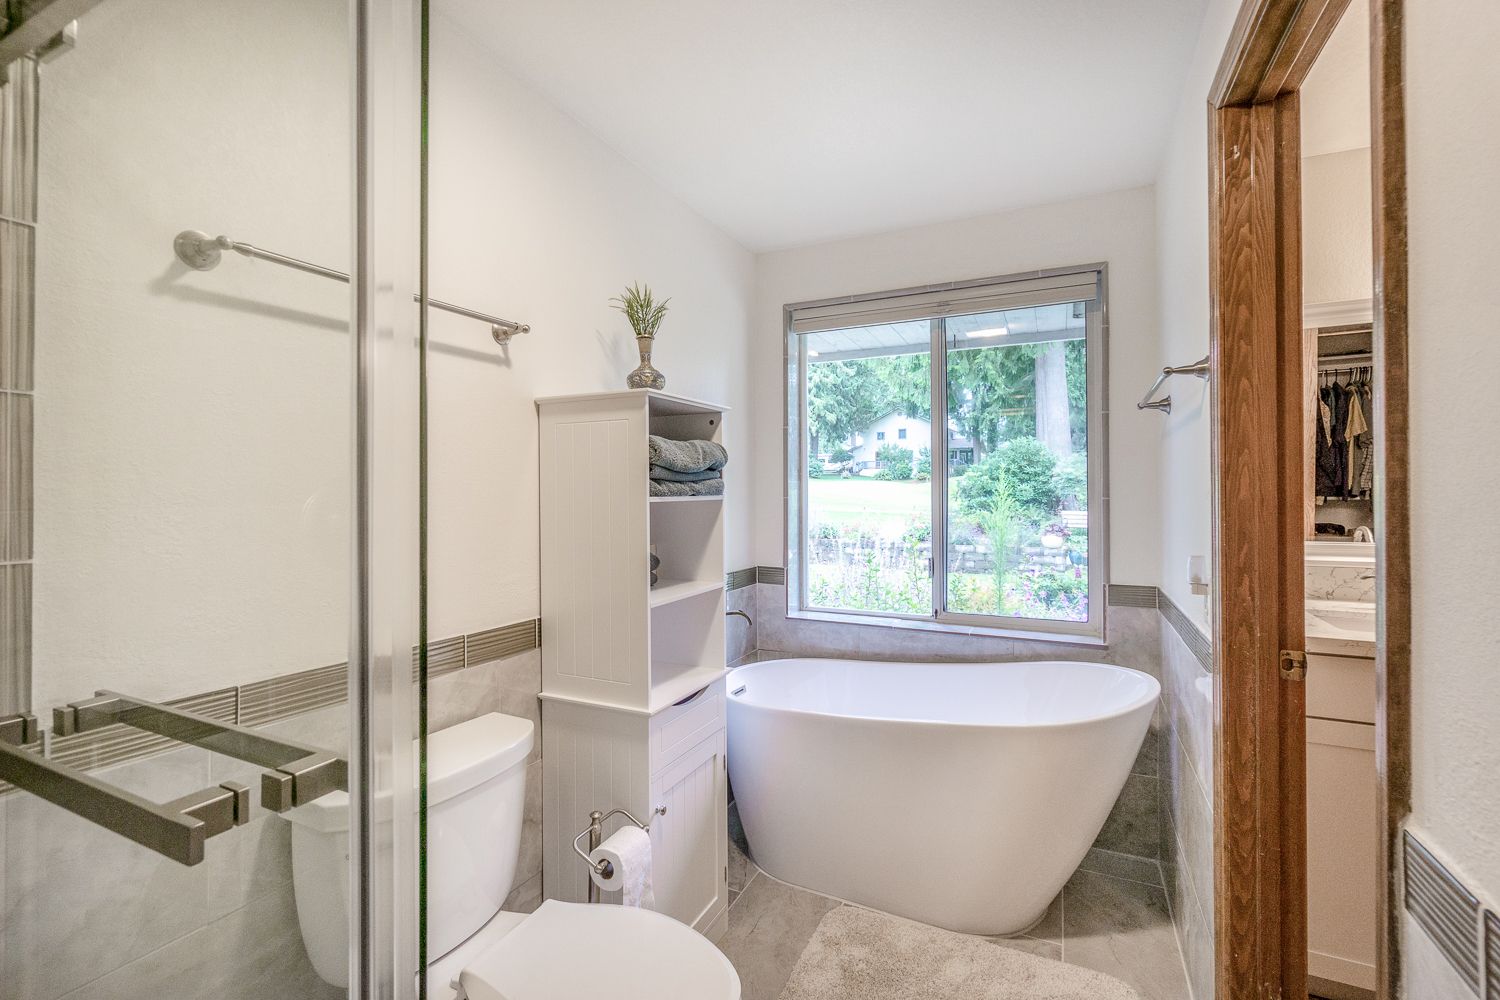 Bathroom remodeling contractors, Steve's Home Services